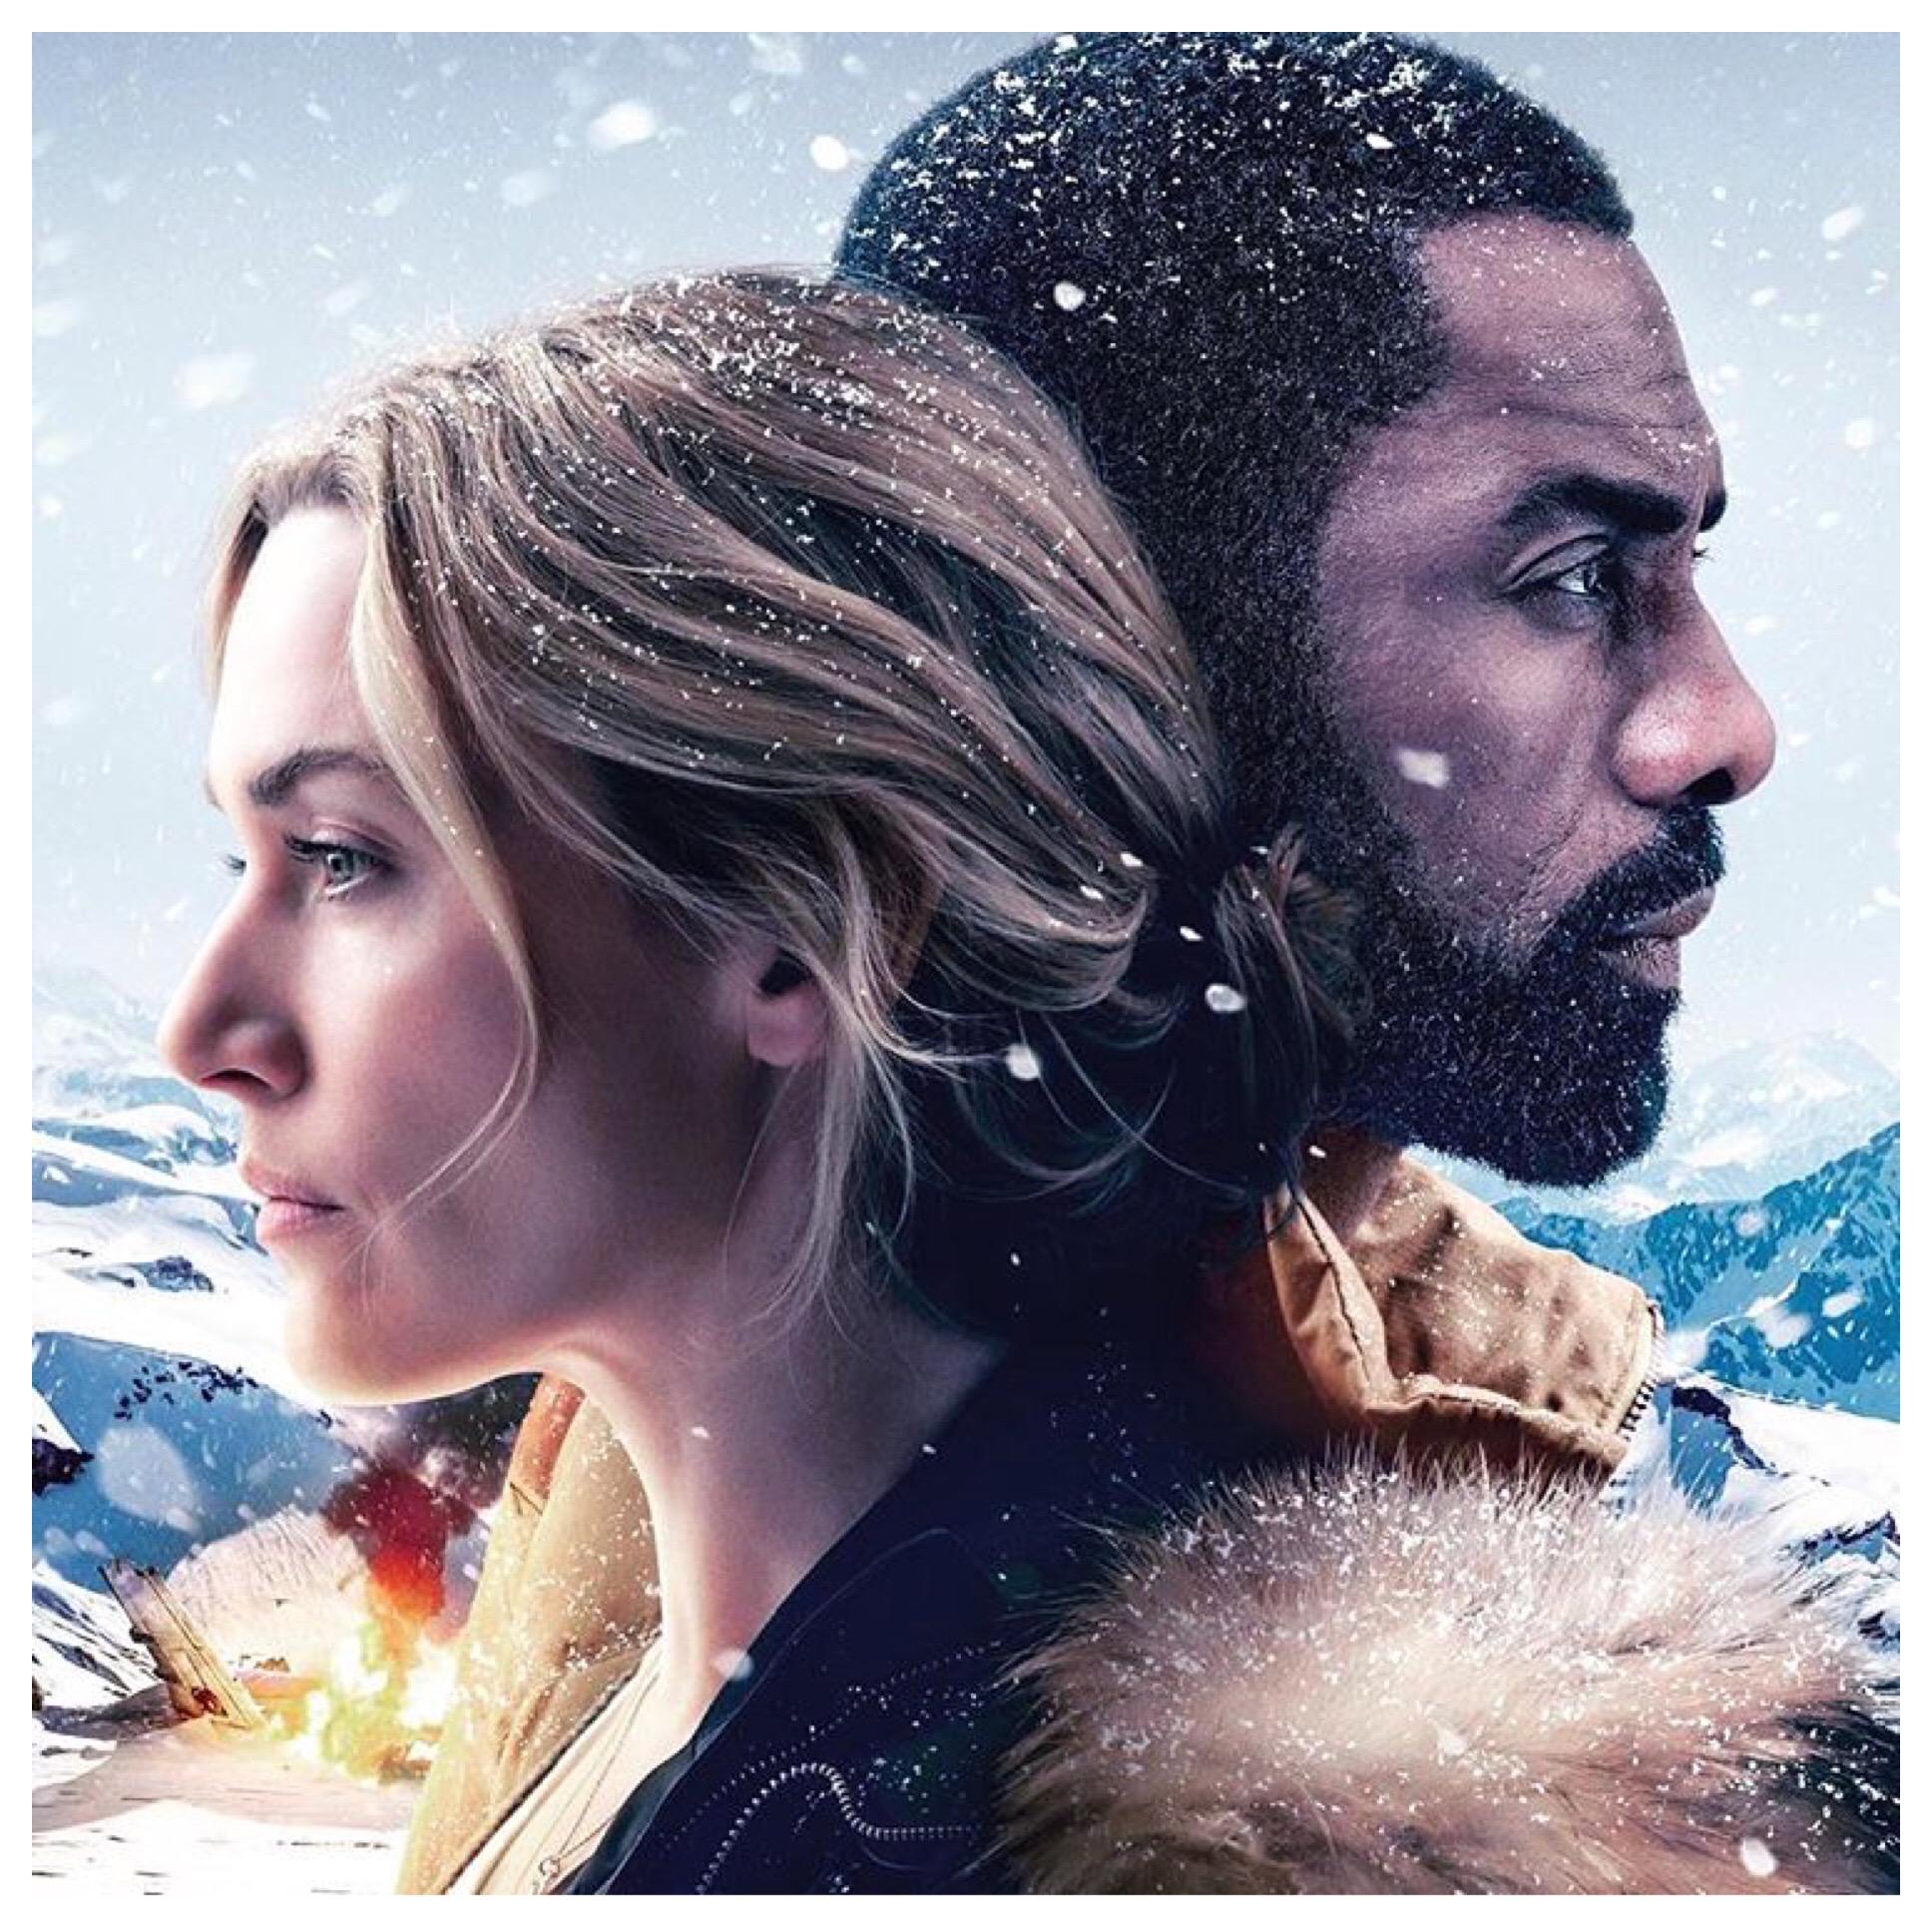 So What Does Actress Kate Winslet Share About Love Scenes With Co Star Idris Elba In “Mountain Between Us”? She Says He’s CRAZY About “These” On A Woman.